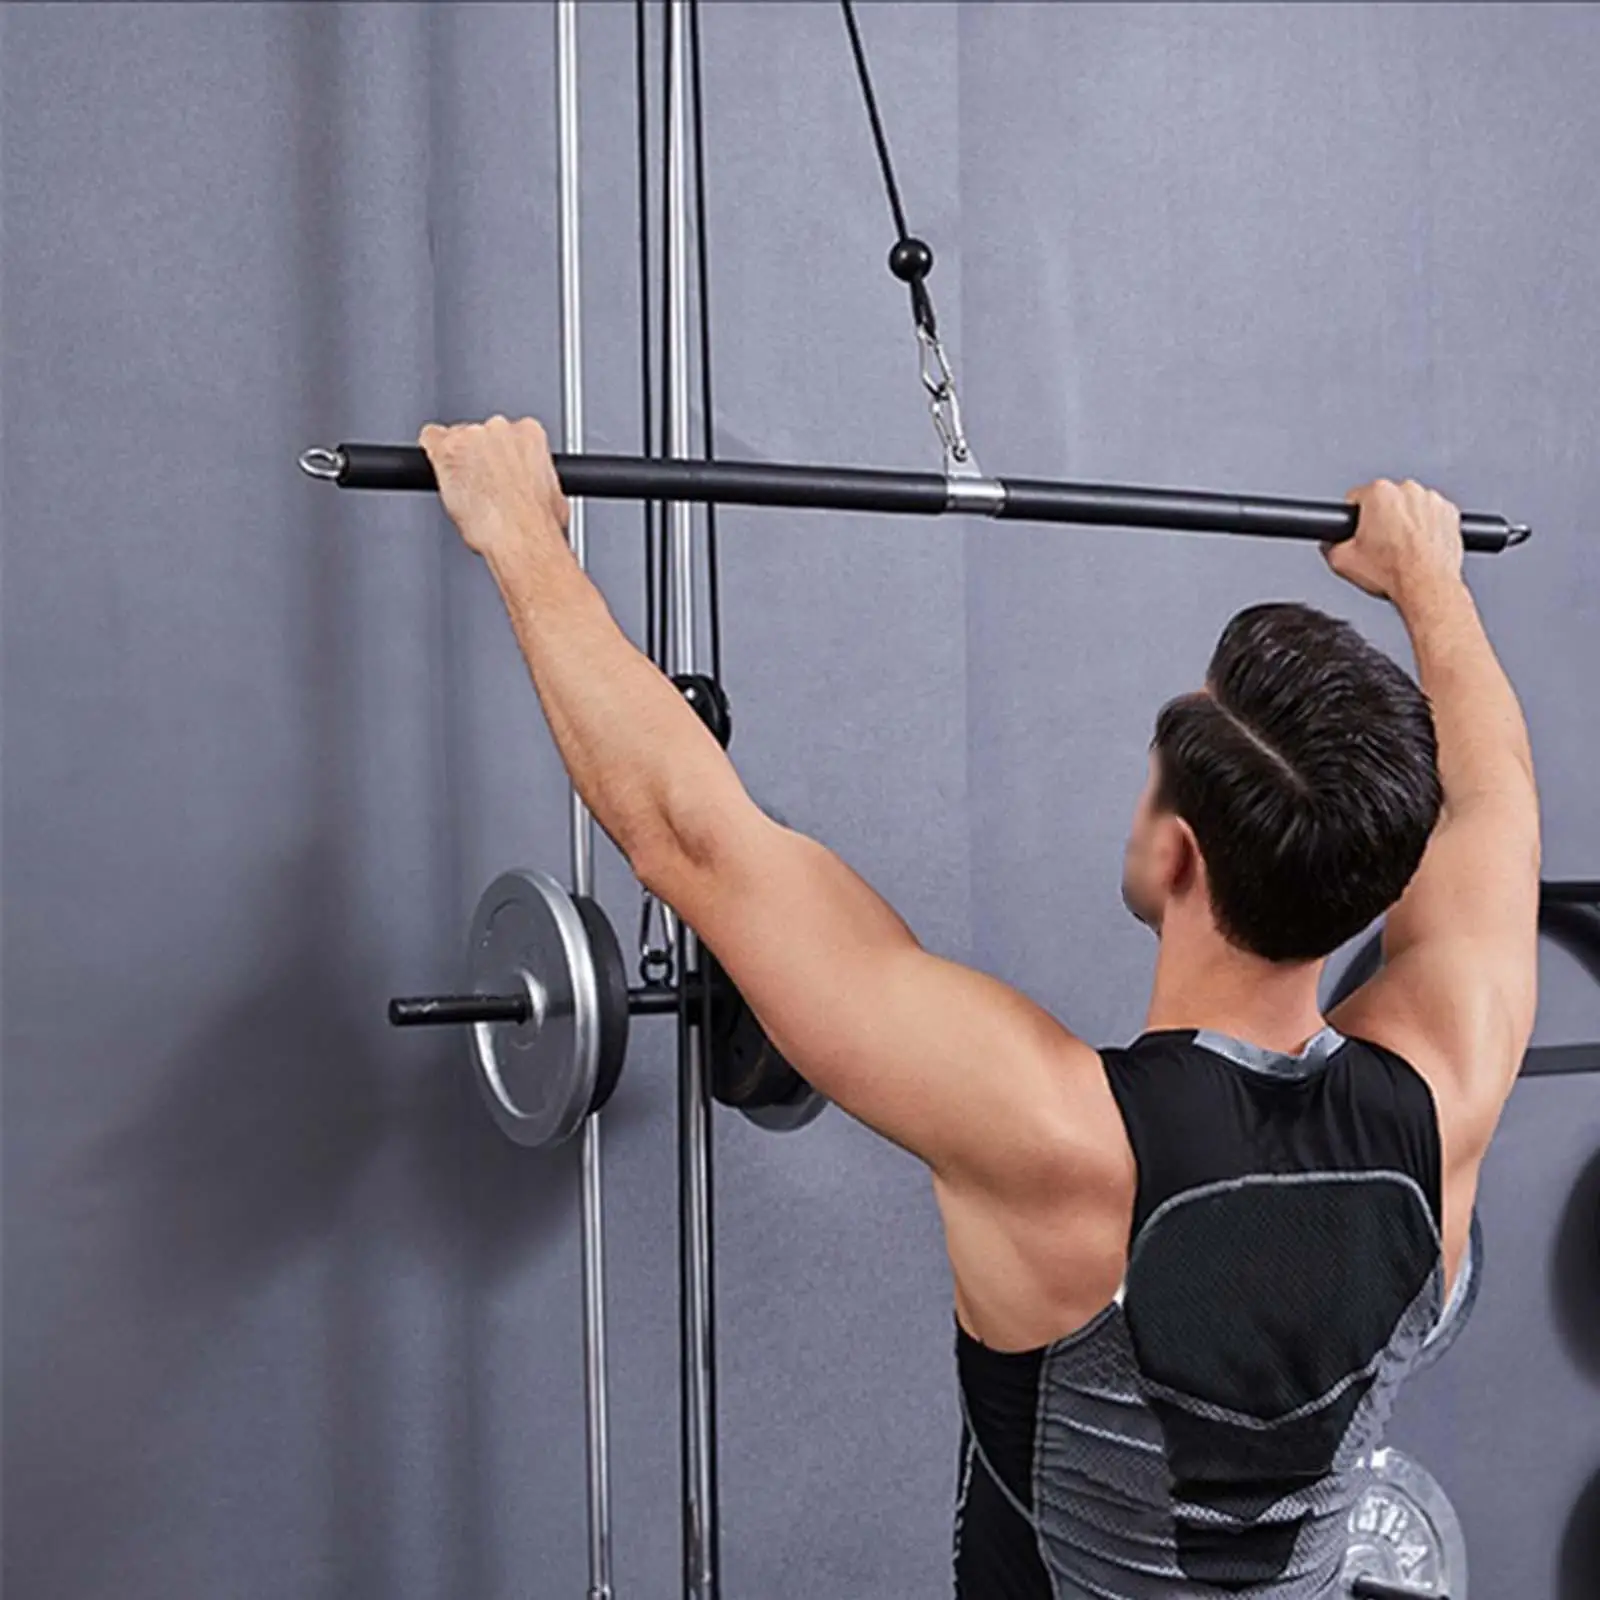 Pull Down Bar, Press Down Bar Detachable Cable Machine Attachment for Back Arm Muscles Building Strength Workout